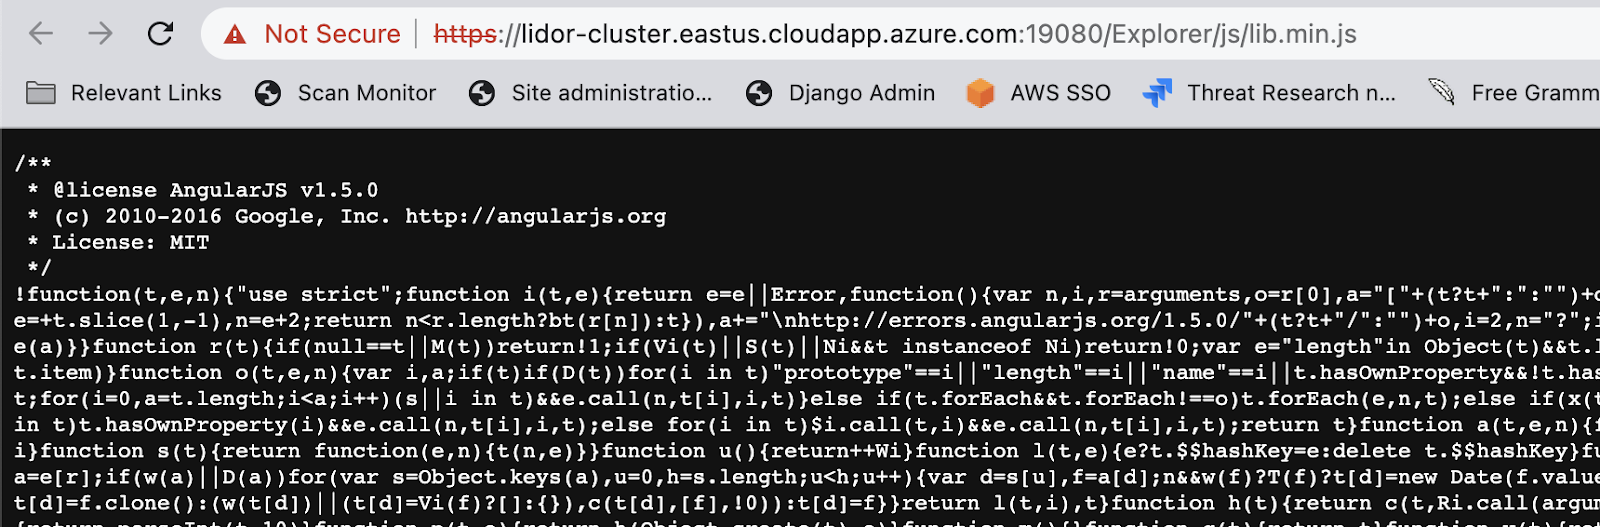 Service Fabric Explorer (SFX) is an application for inspecting and managing cloud applications and Nodes in a Microsoft Azure Service Fabric cluster.